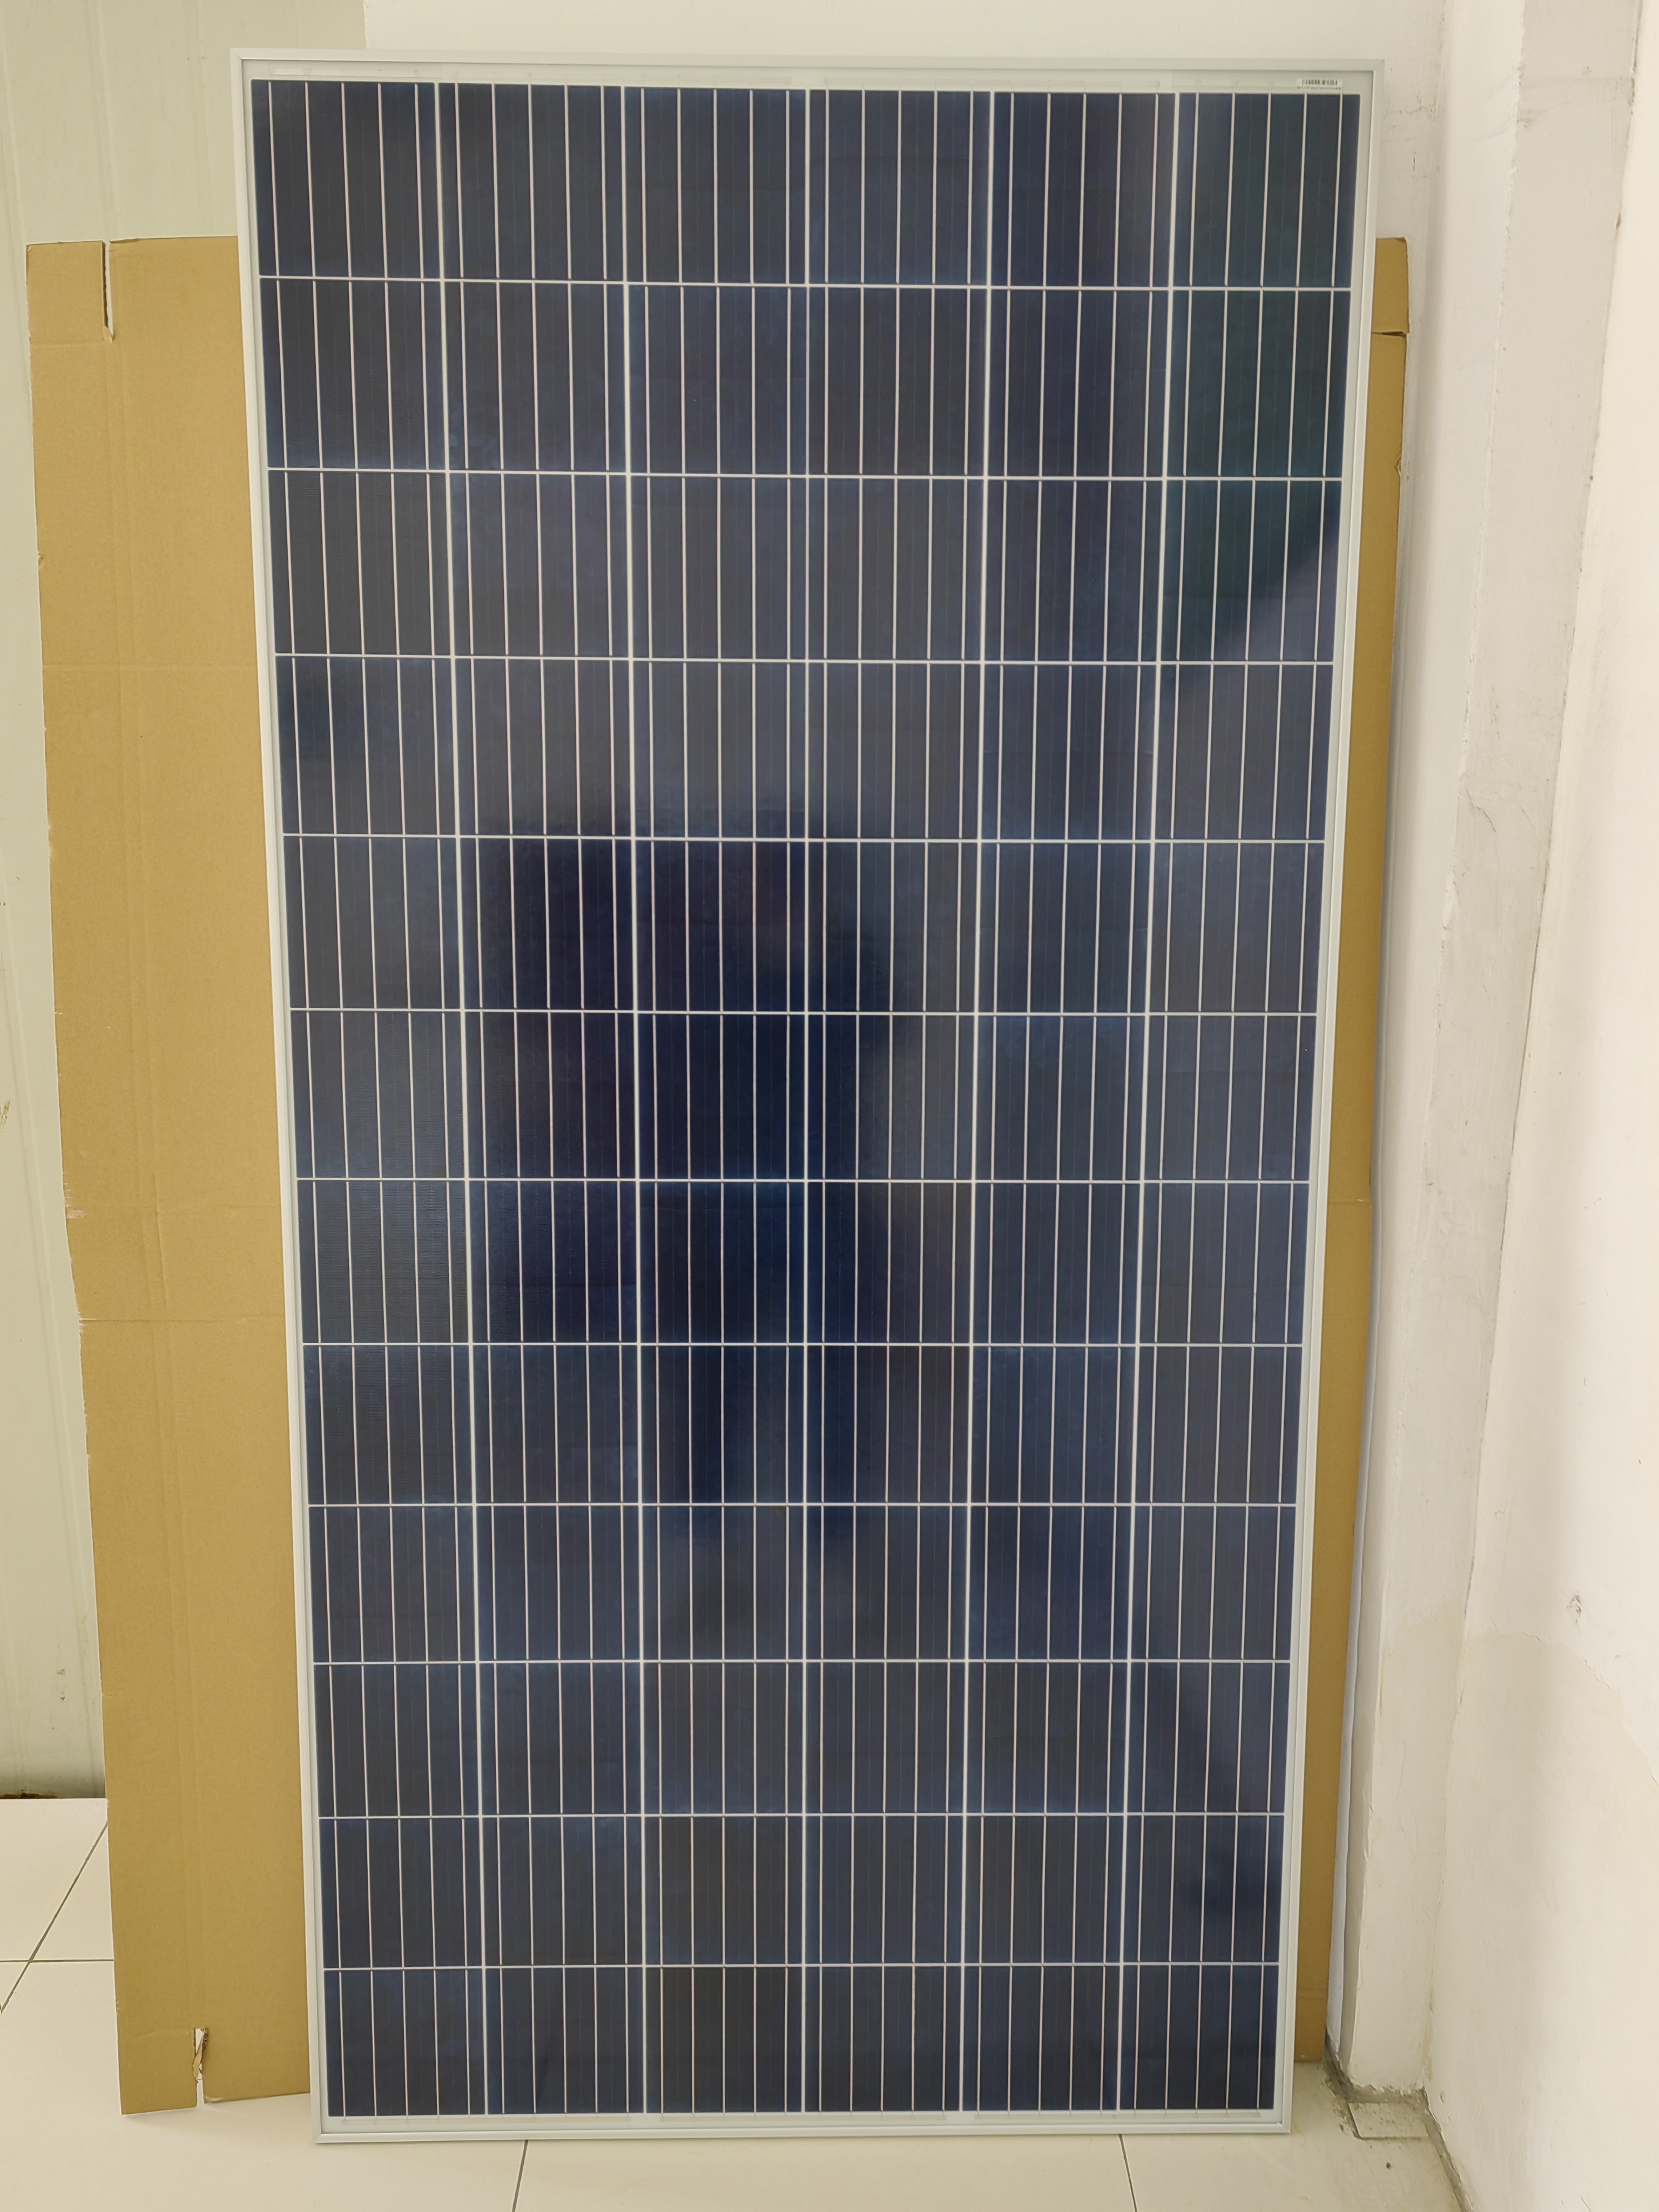 157mm PERC Solar Cells 340W Poly Solar Panel Photovoltaic PV Module For Home Solar System 320W 330W